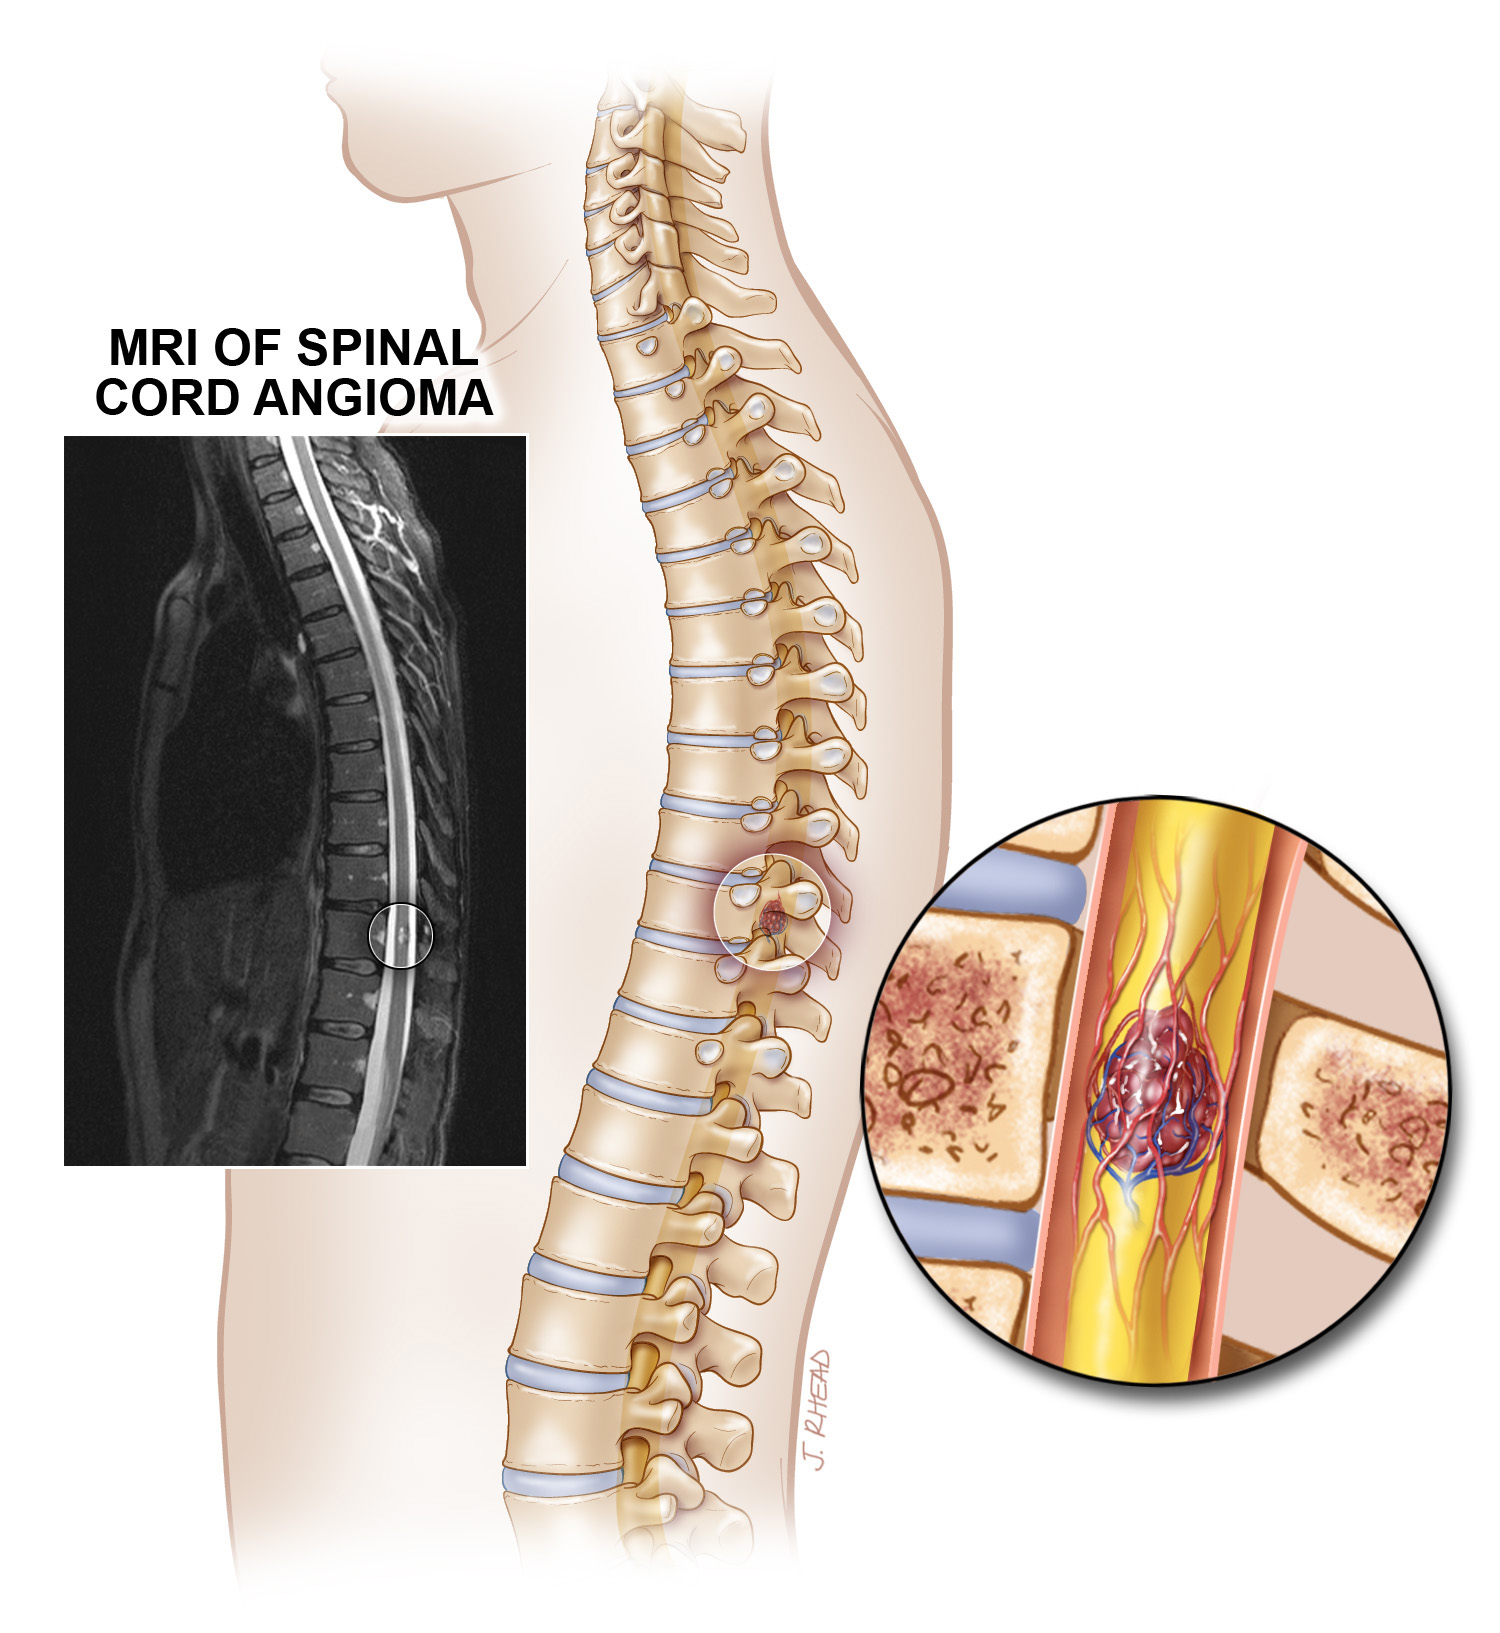 MRI of Spinal cord cavernous malformation